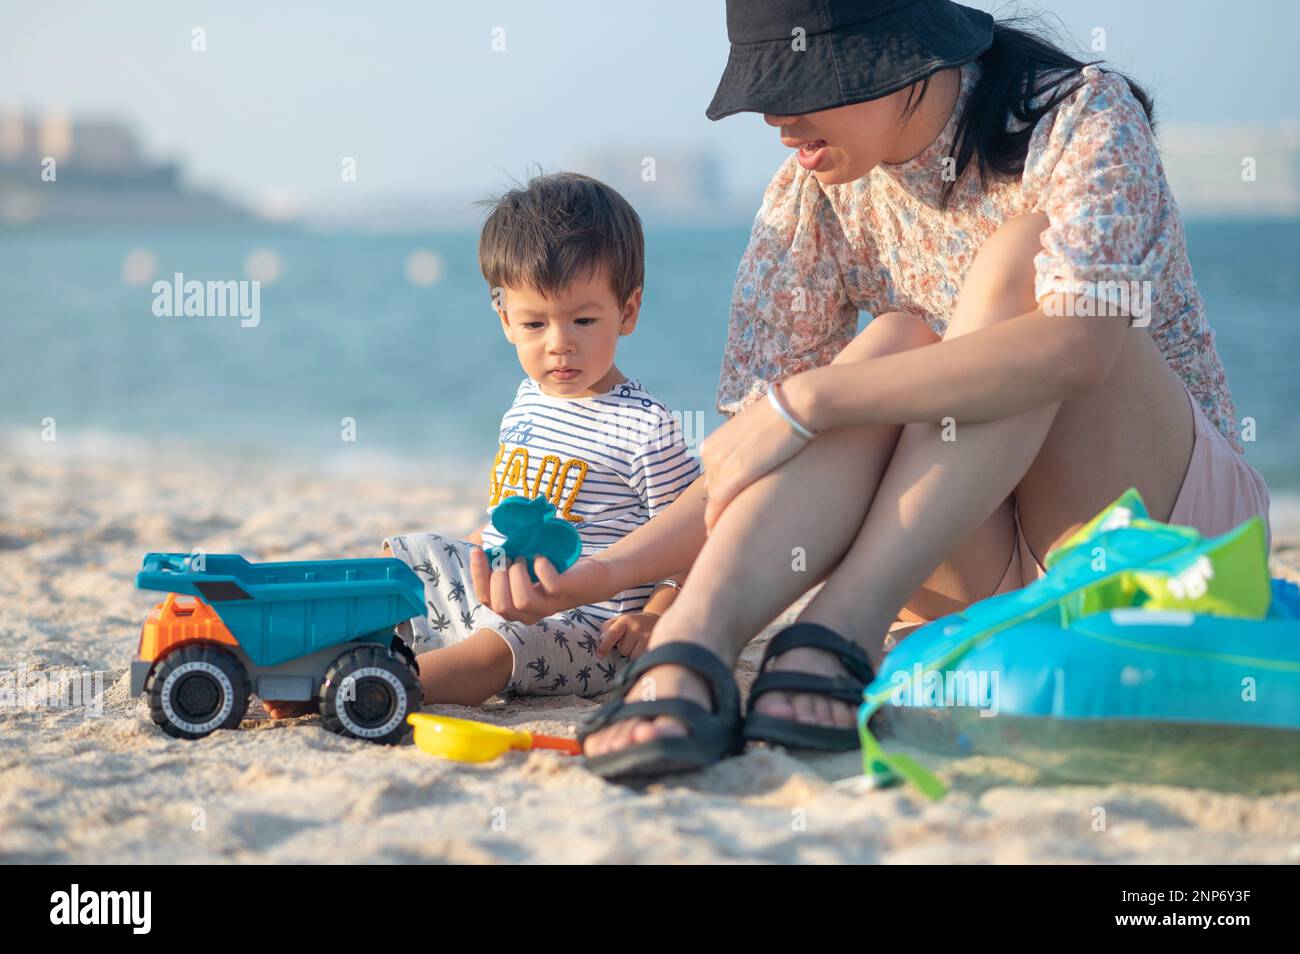 Mother playing with a toy truck and the sand on the beach with her baby boy enjoying the summer together by the seaside. Filled with joy and emotion t Stock Photo